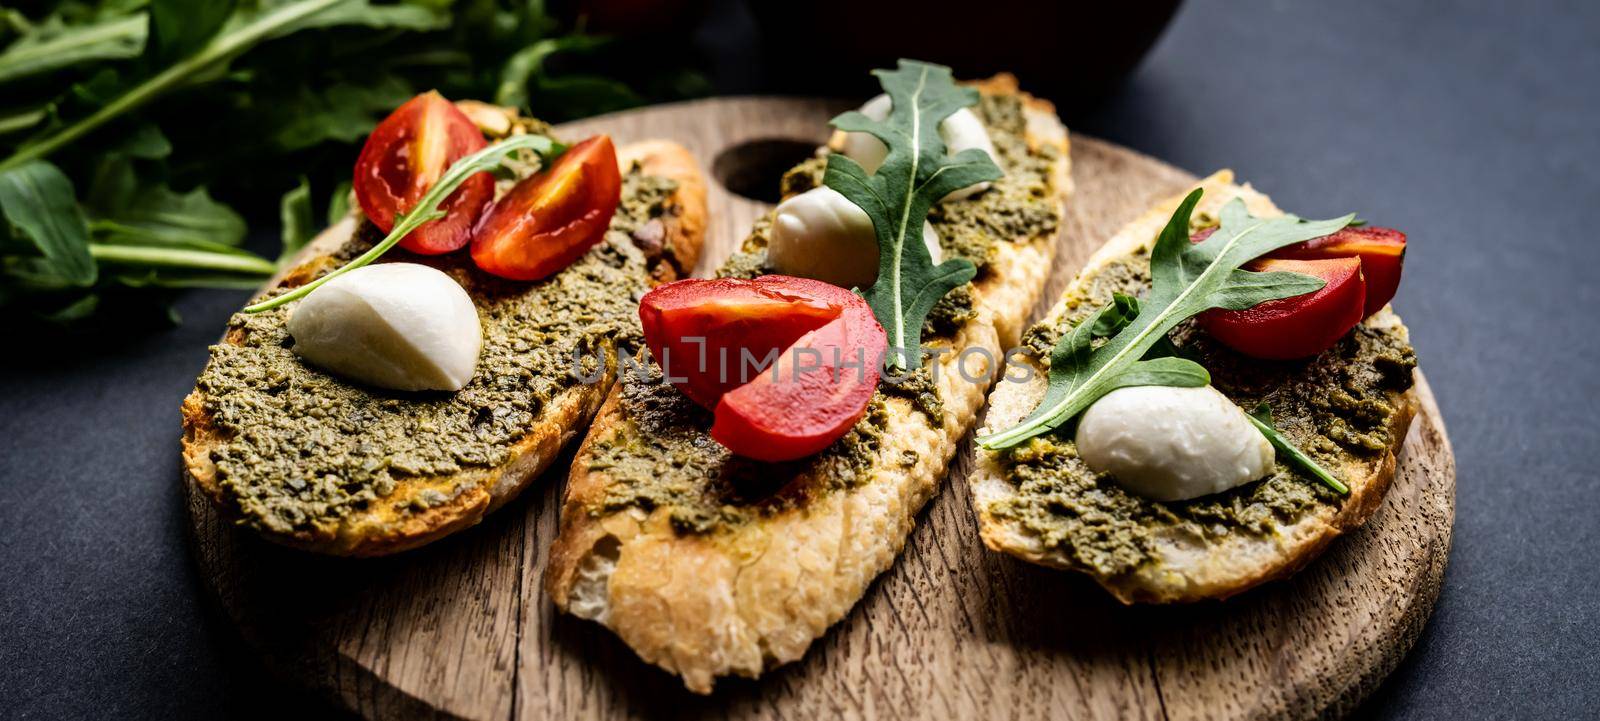 Bruschettas with pesto and tomatoes by GekaSkr